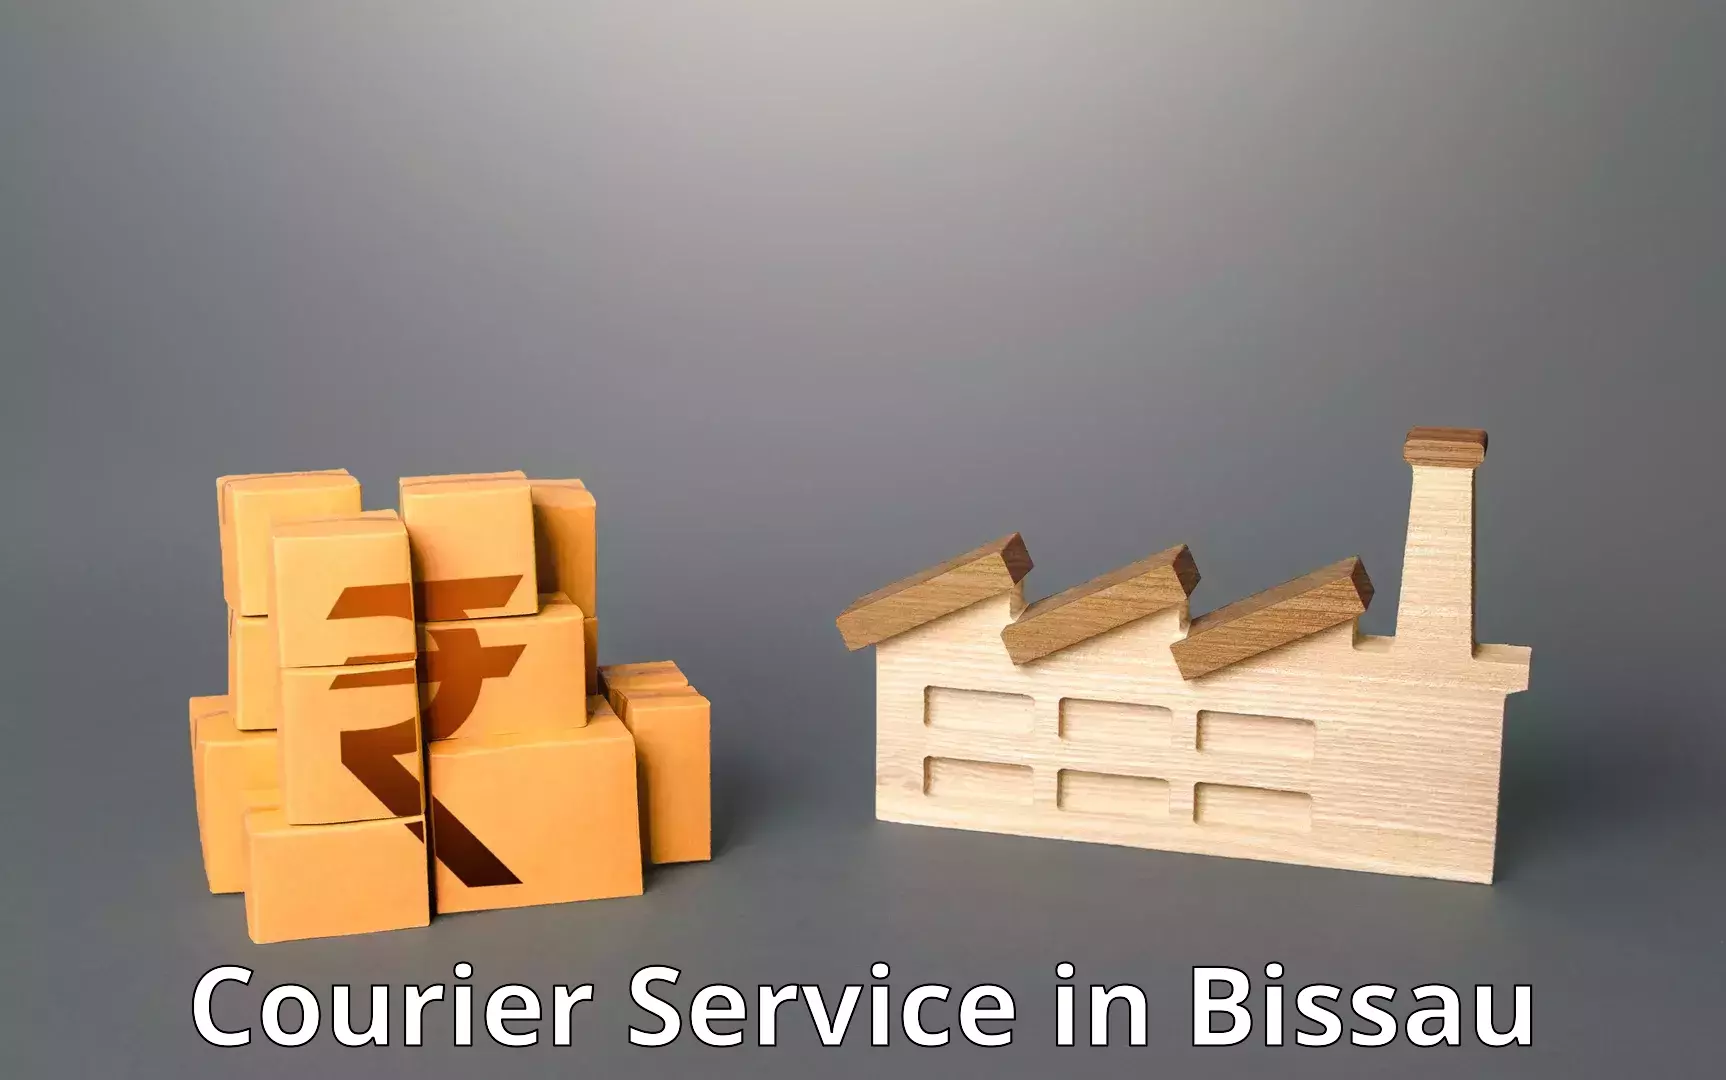 Personal courier services in Bissau